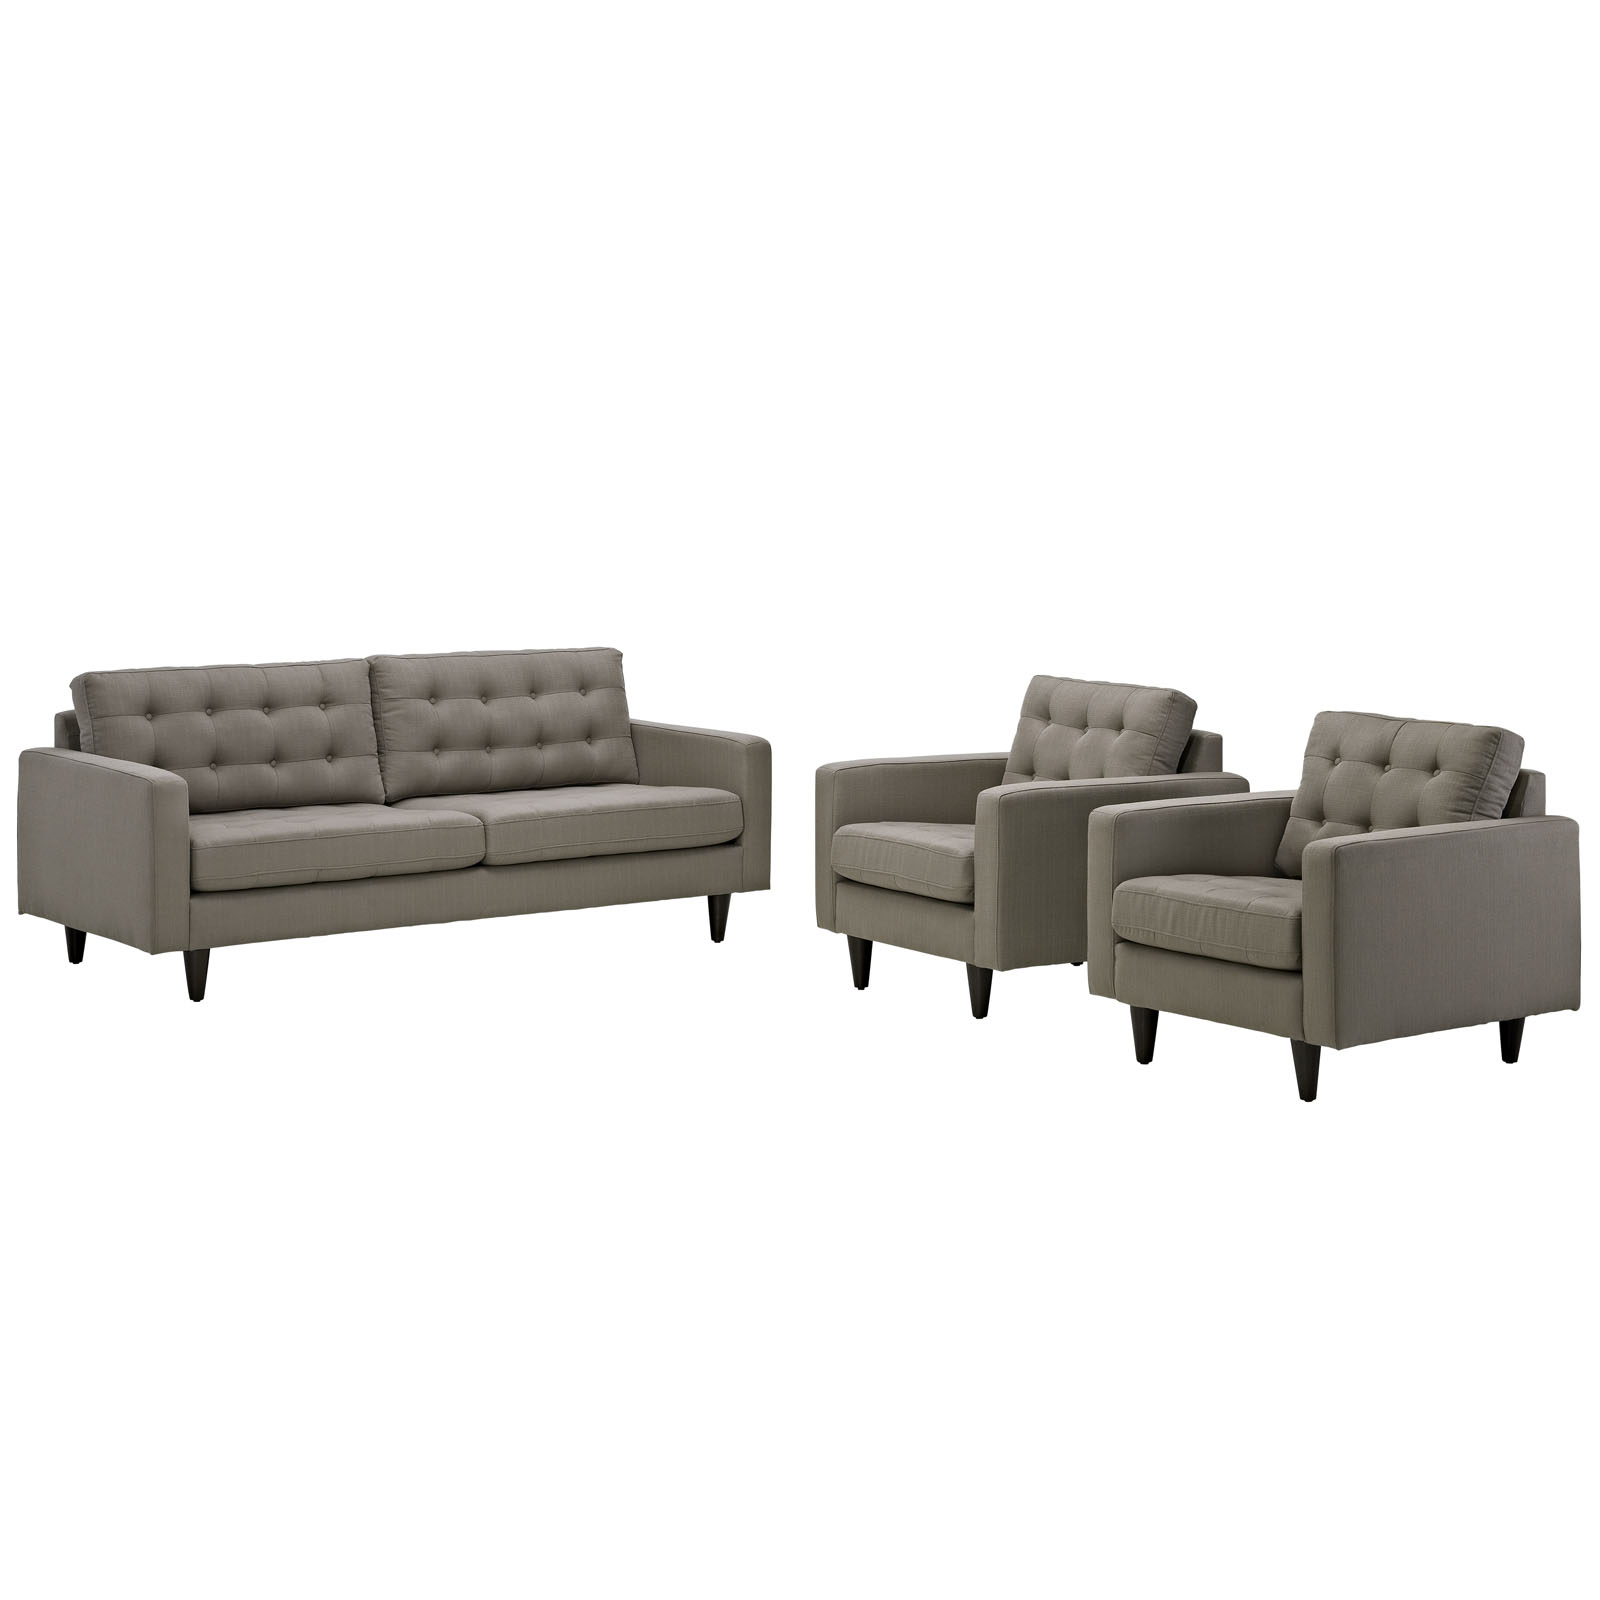 Modway Imports Granite Empress Sofa and Armchairs Set of 3